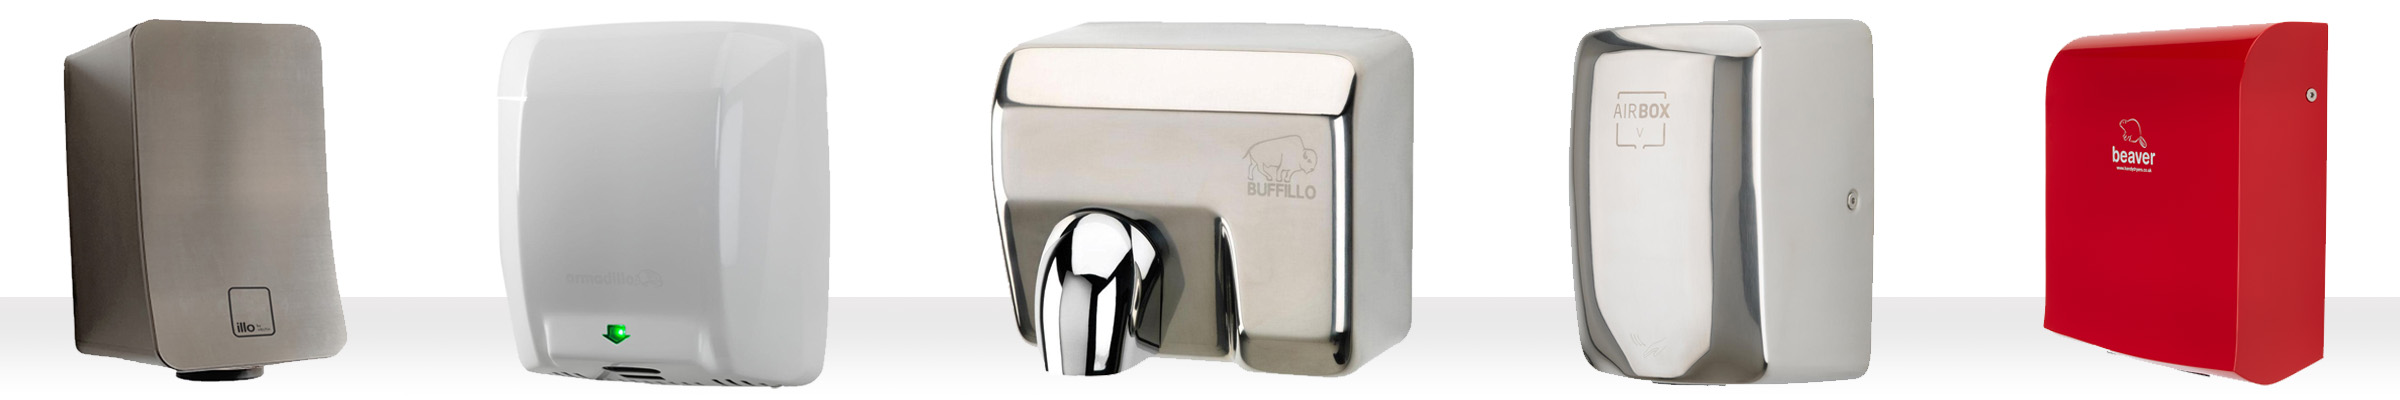 High speed hand dryers. Powerful hand dryers that don’t waste time.